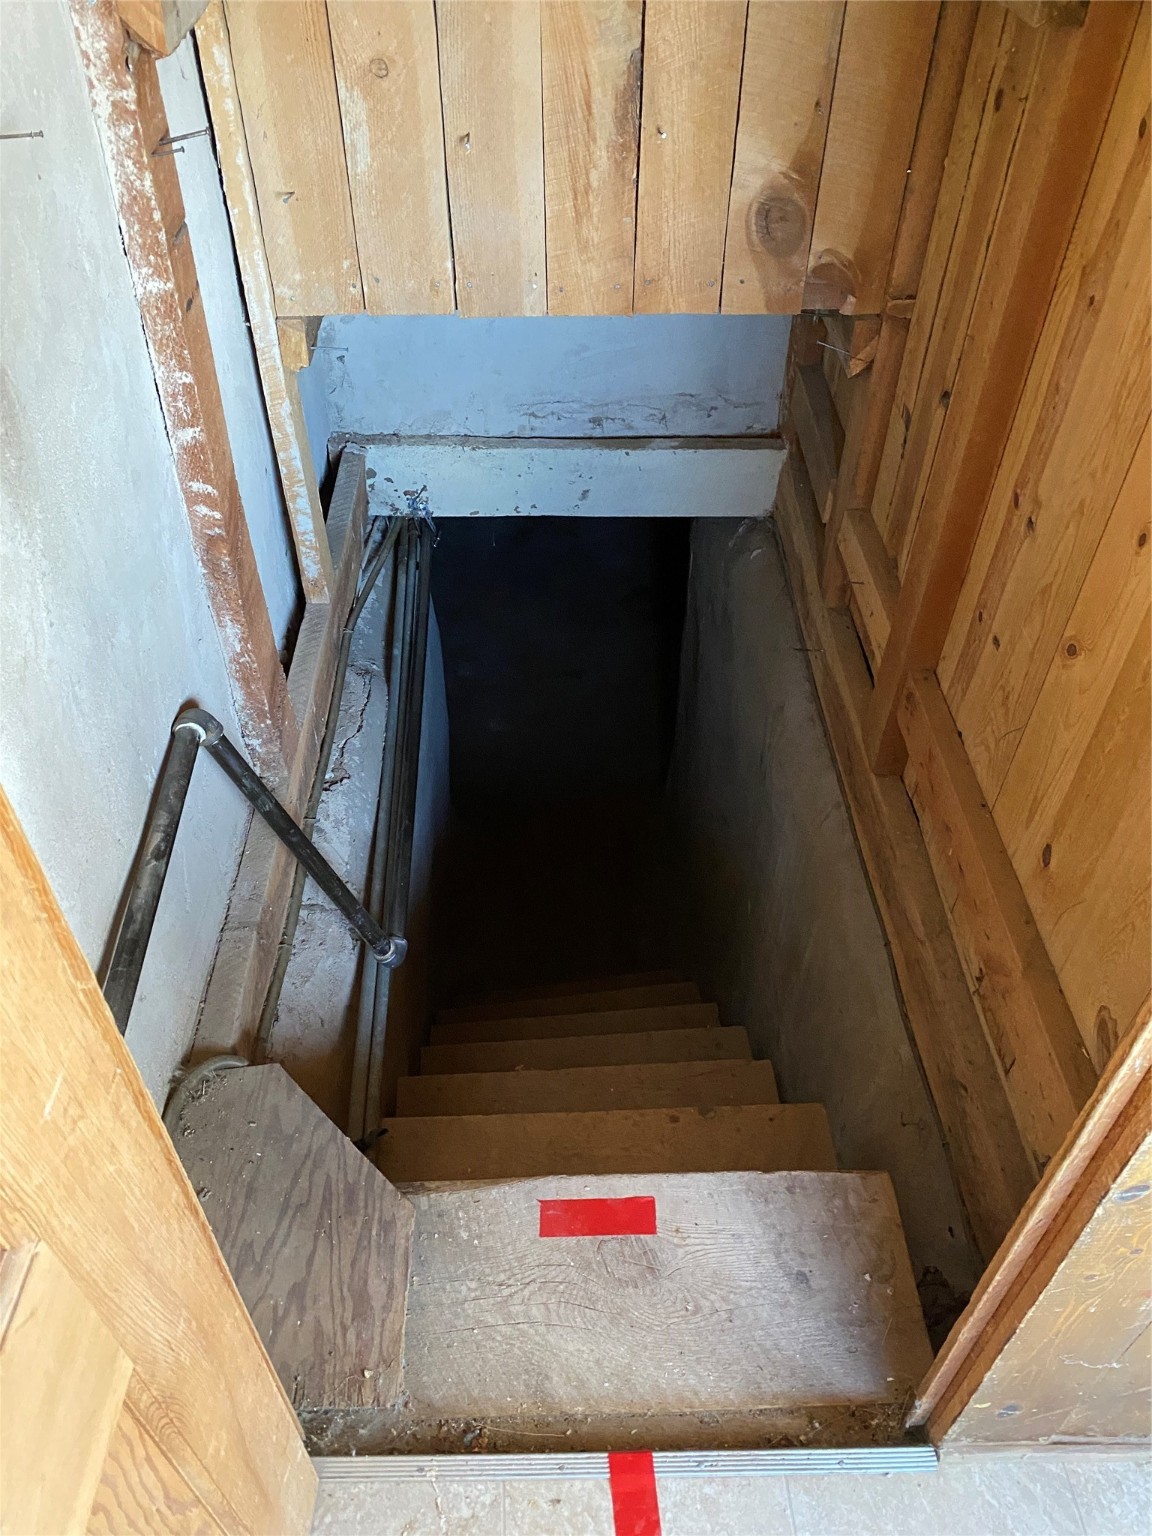 Stairs going to basement